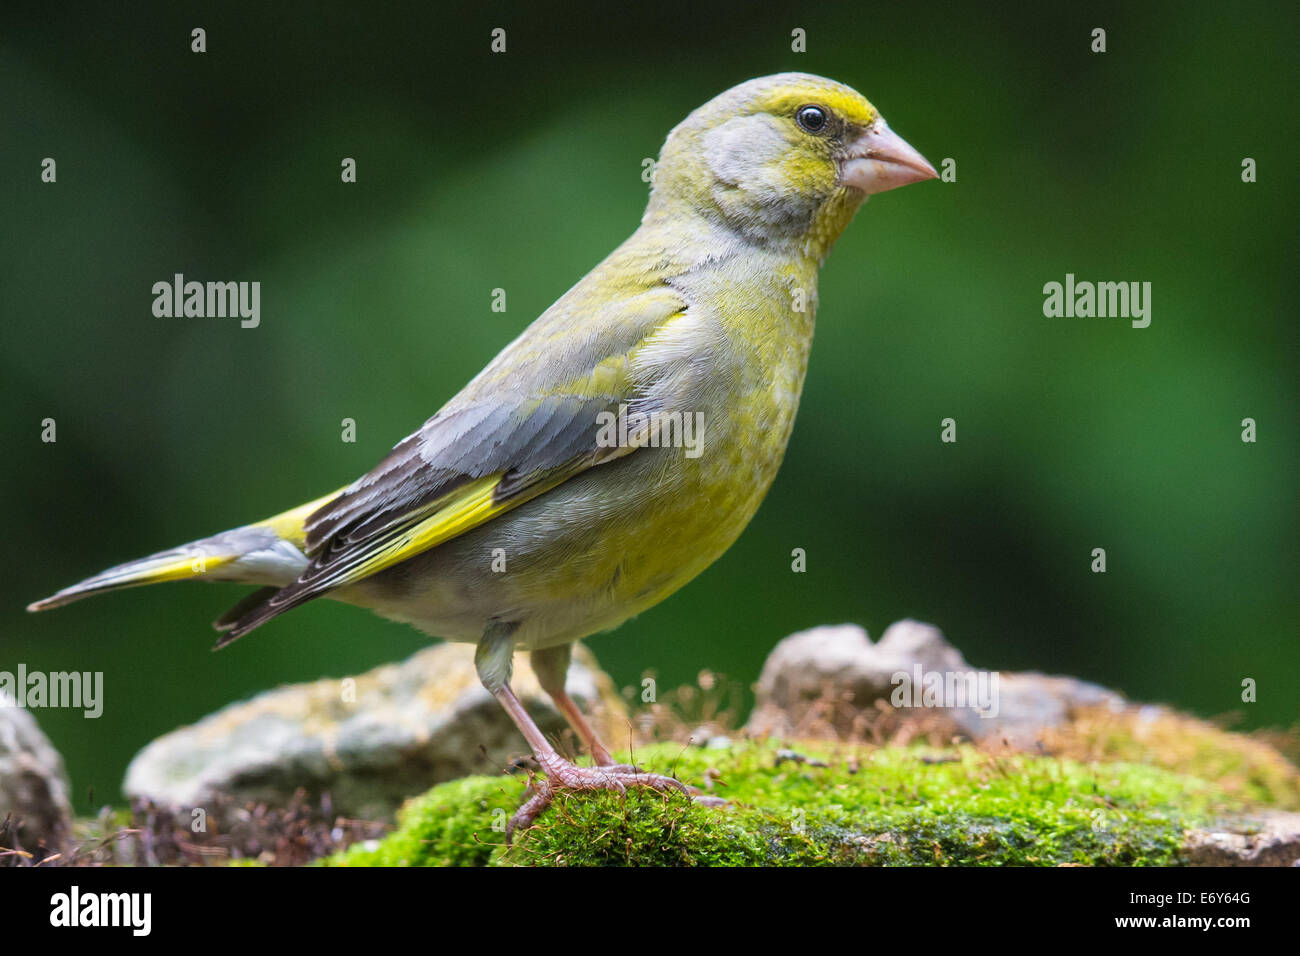 Adult male European Greenfinch (Chloris chloris)standing on moss-covered stones Stock Photo